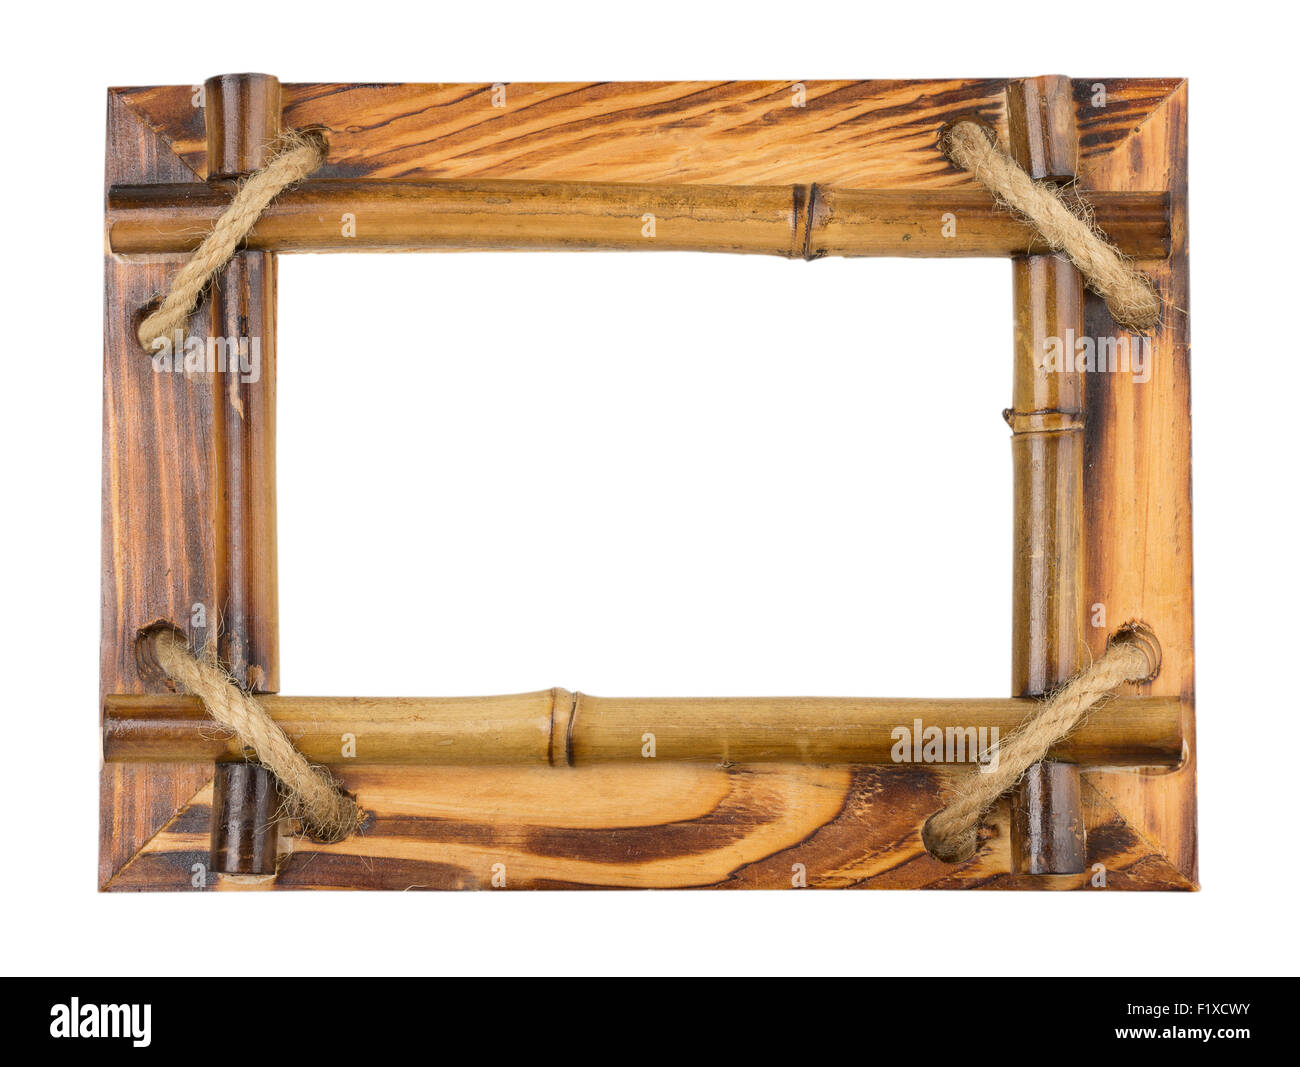 Bamboo frame tied up with rope isolated on white. Stock Photo